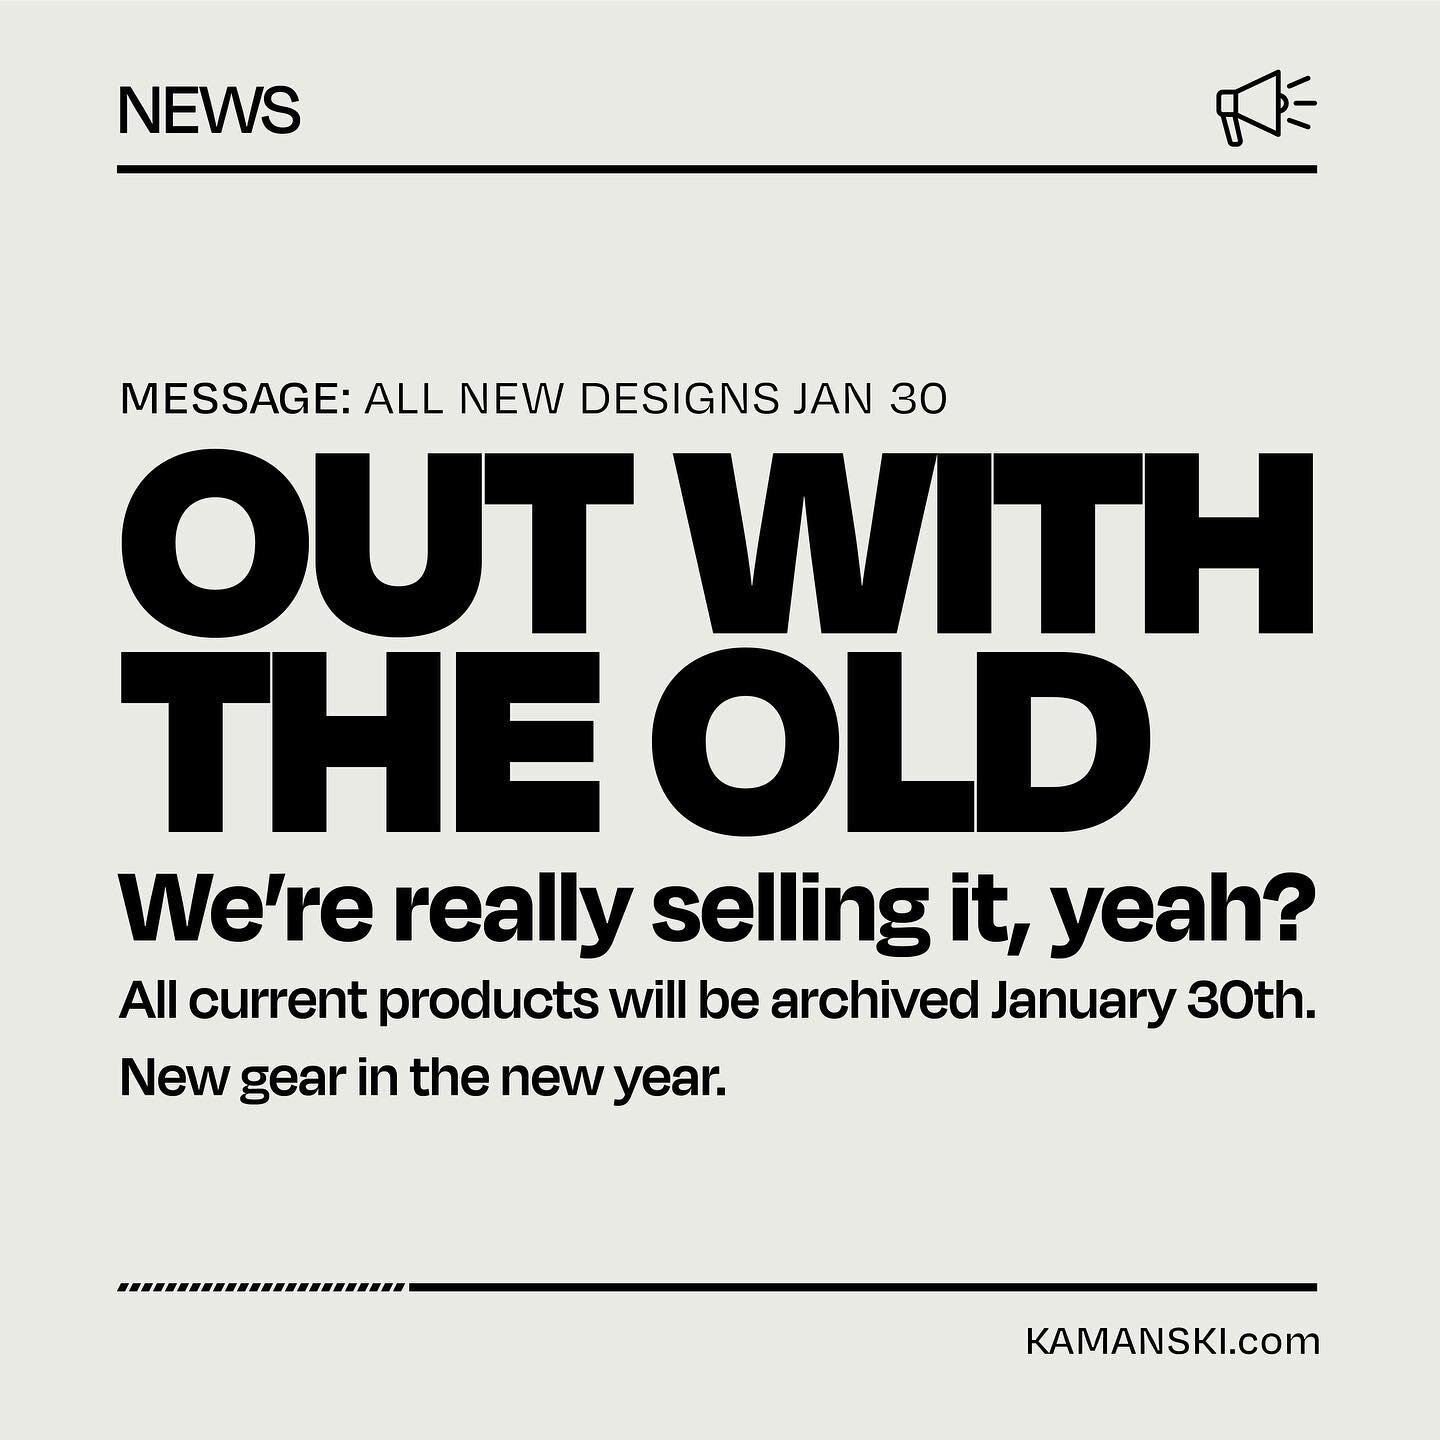 Out with the old &ndash; we&rsquo;re really great at salesmanship around here 😁. It&rsquo;s time to clear the shelves as it were and archiving the existing designs Jan 30th. That&rsquo;s FIVE days!
#kamanskigoods #apparel #streetwear #smallbusiness 